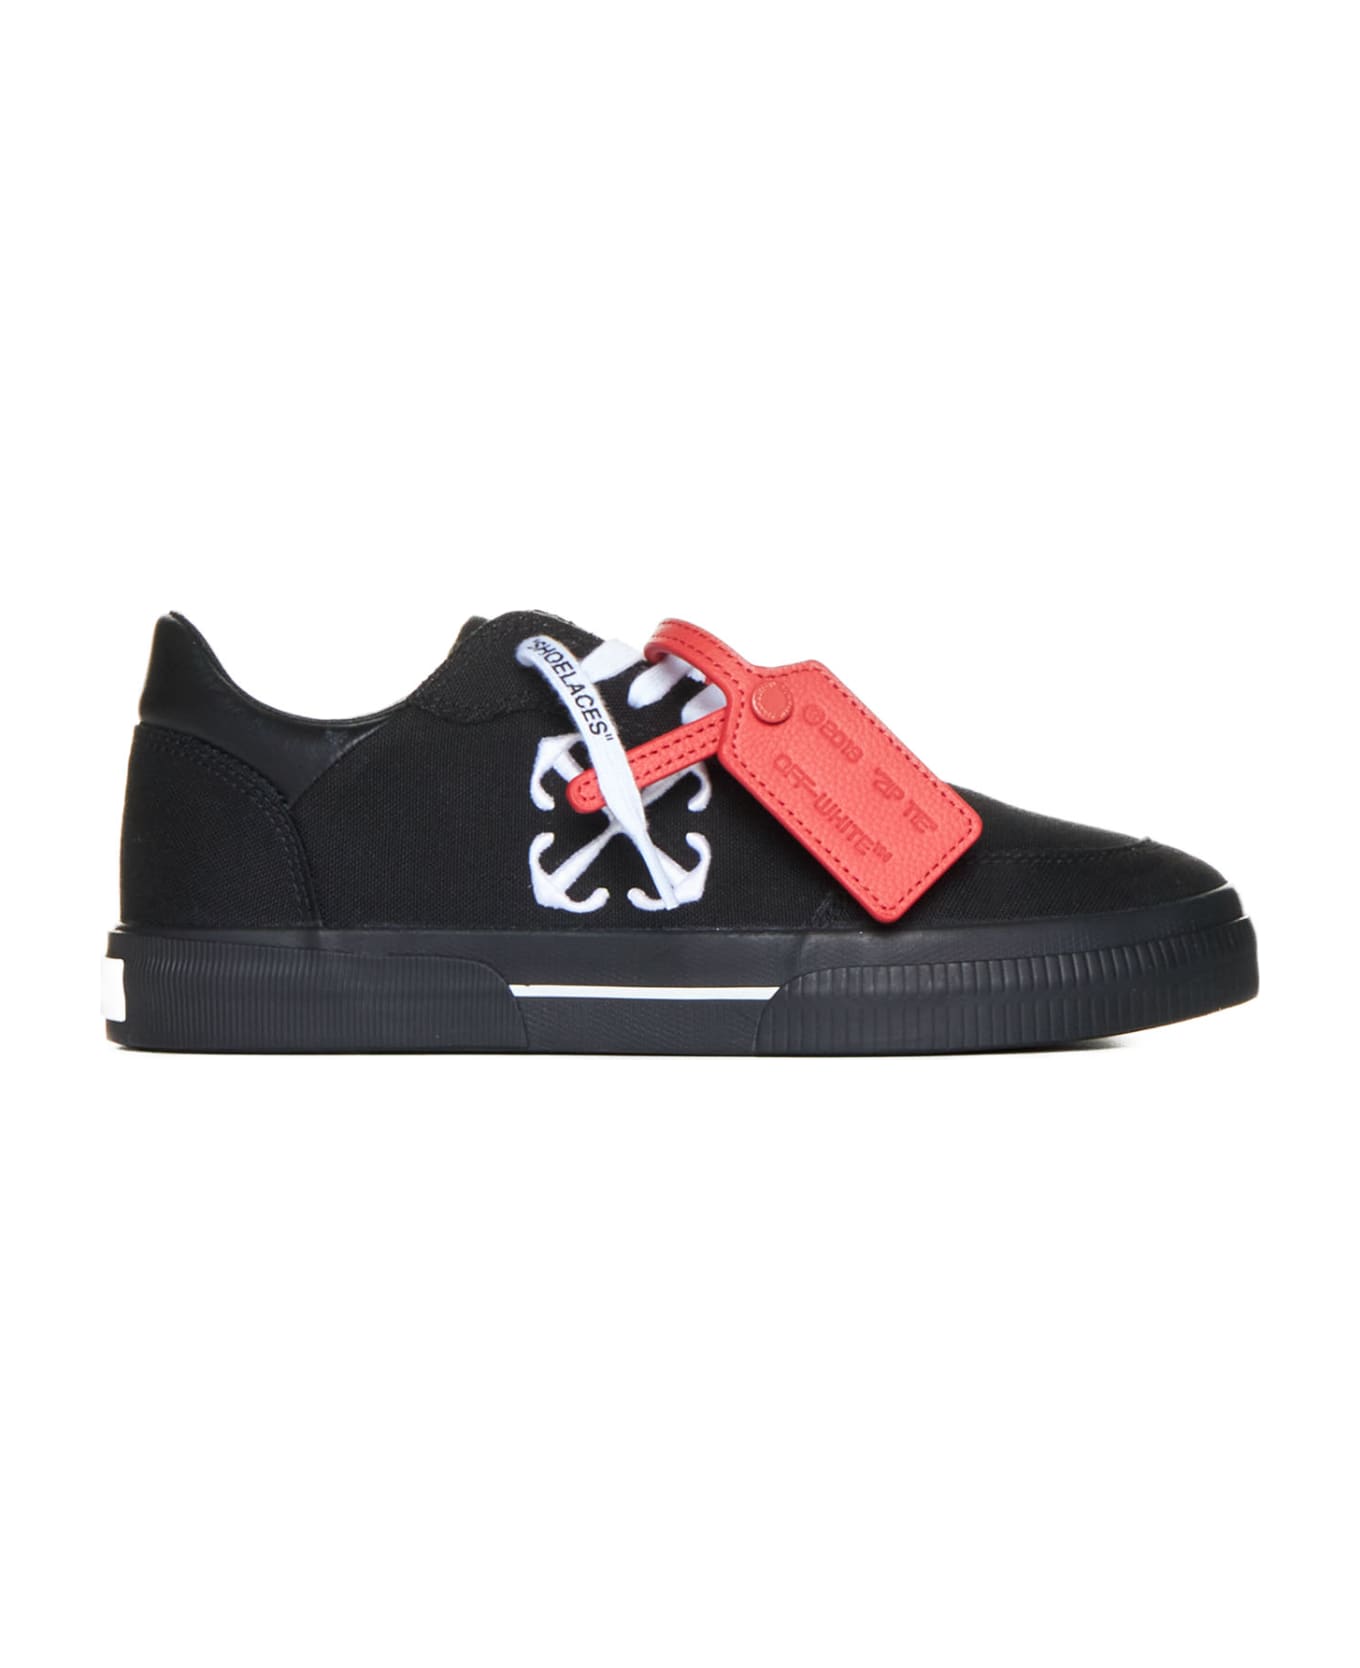 Off-White Sneakers - Black